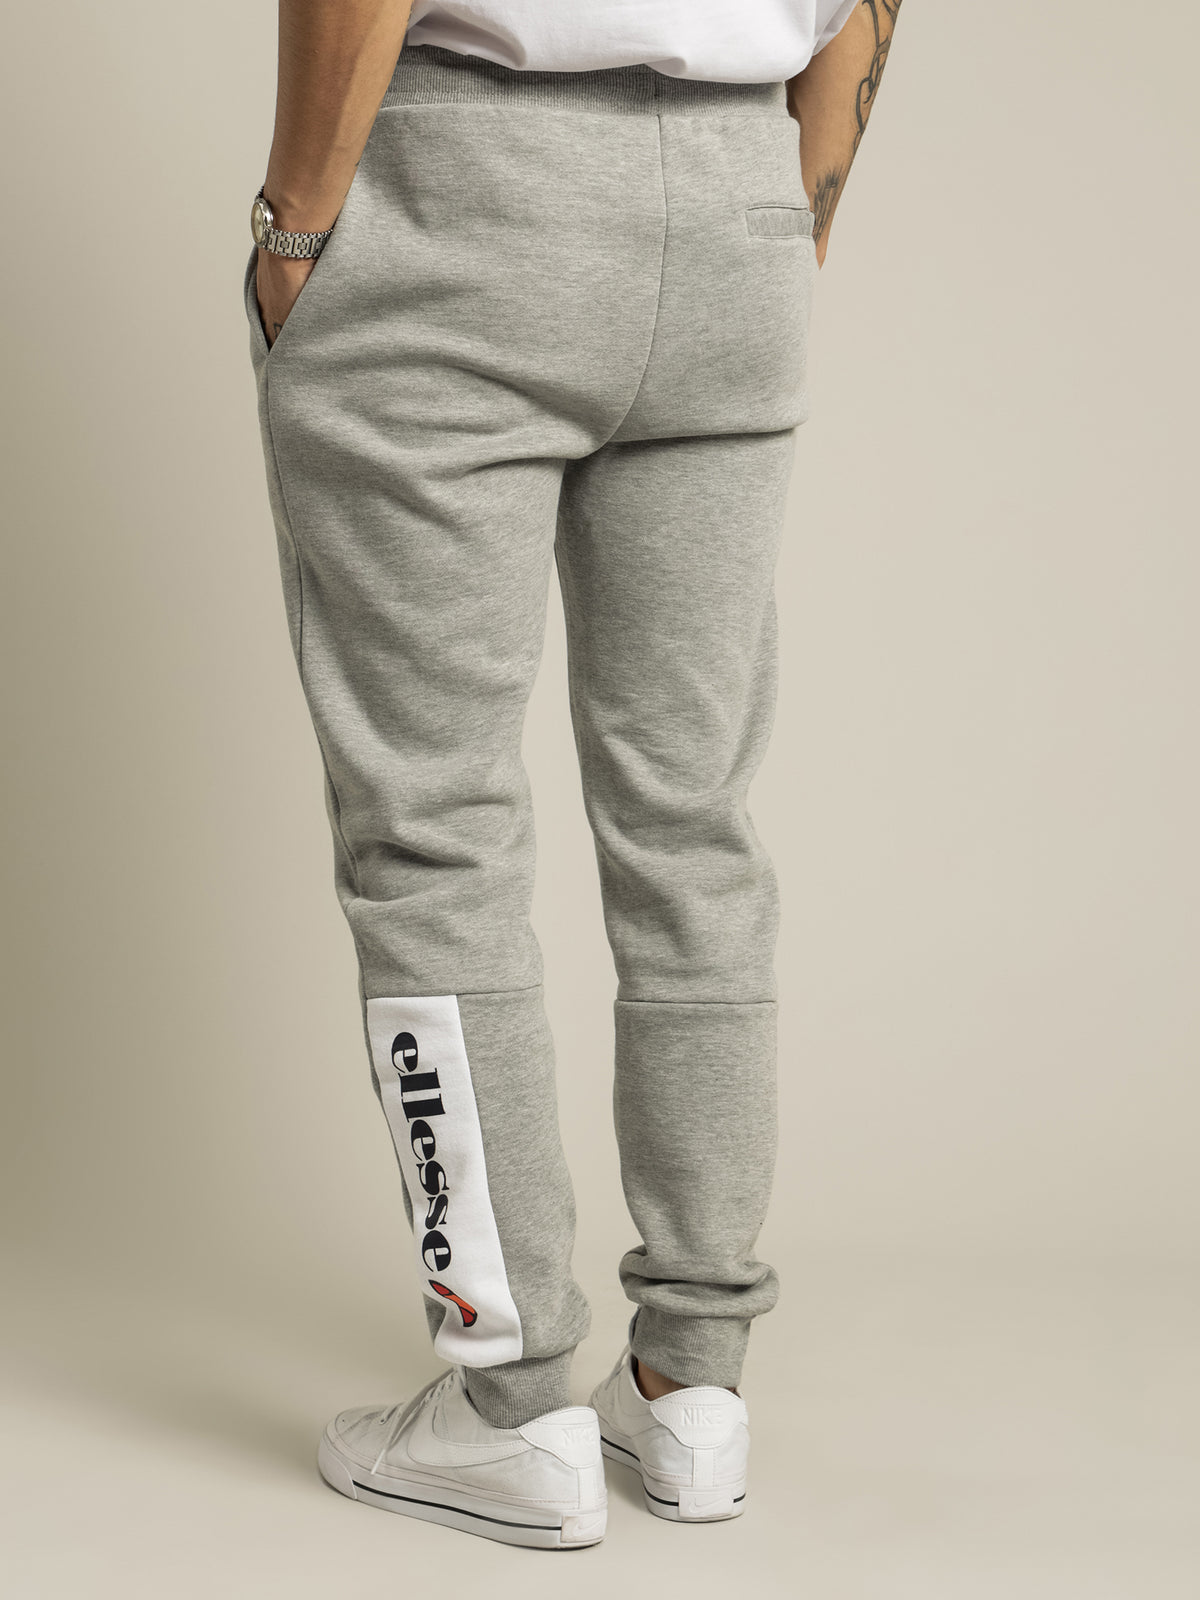 Quenso Track Pants in Grey Marle